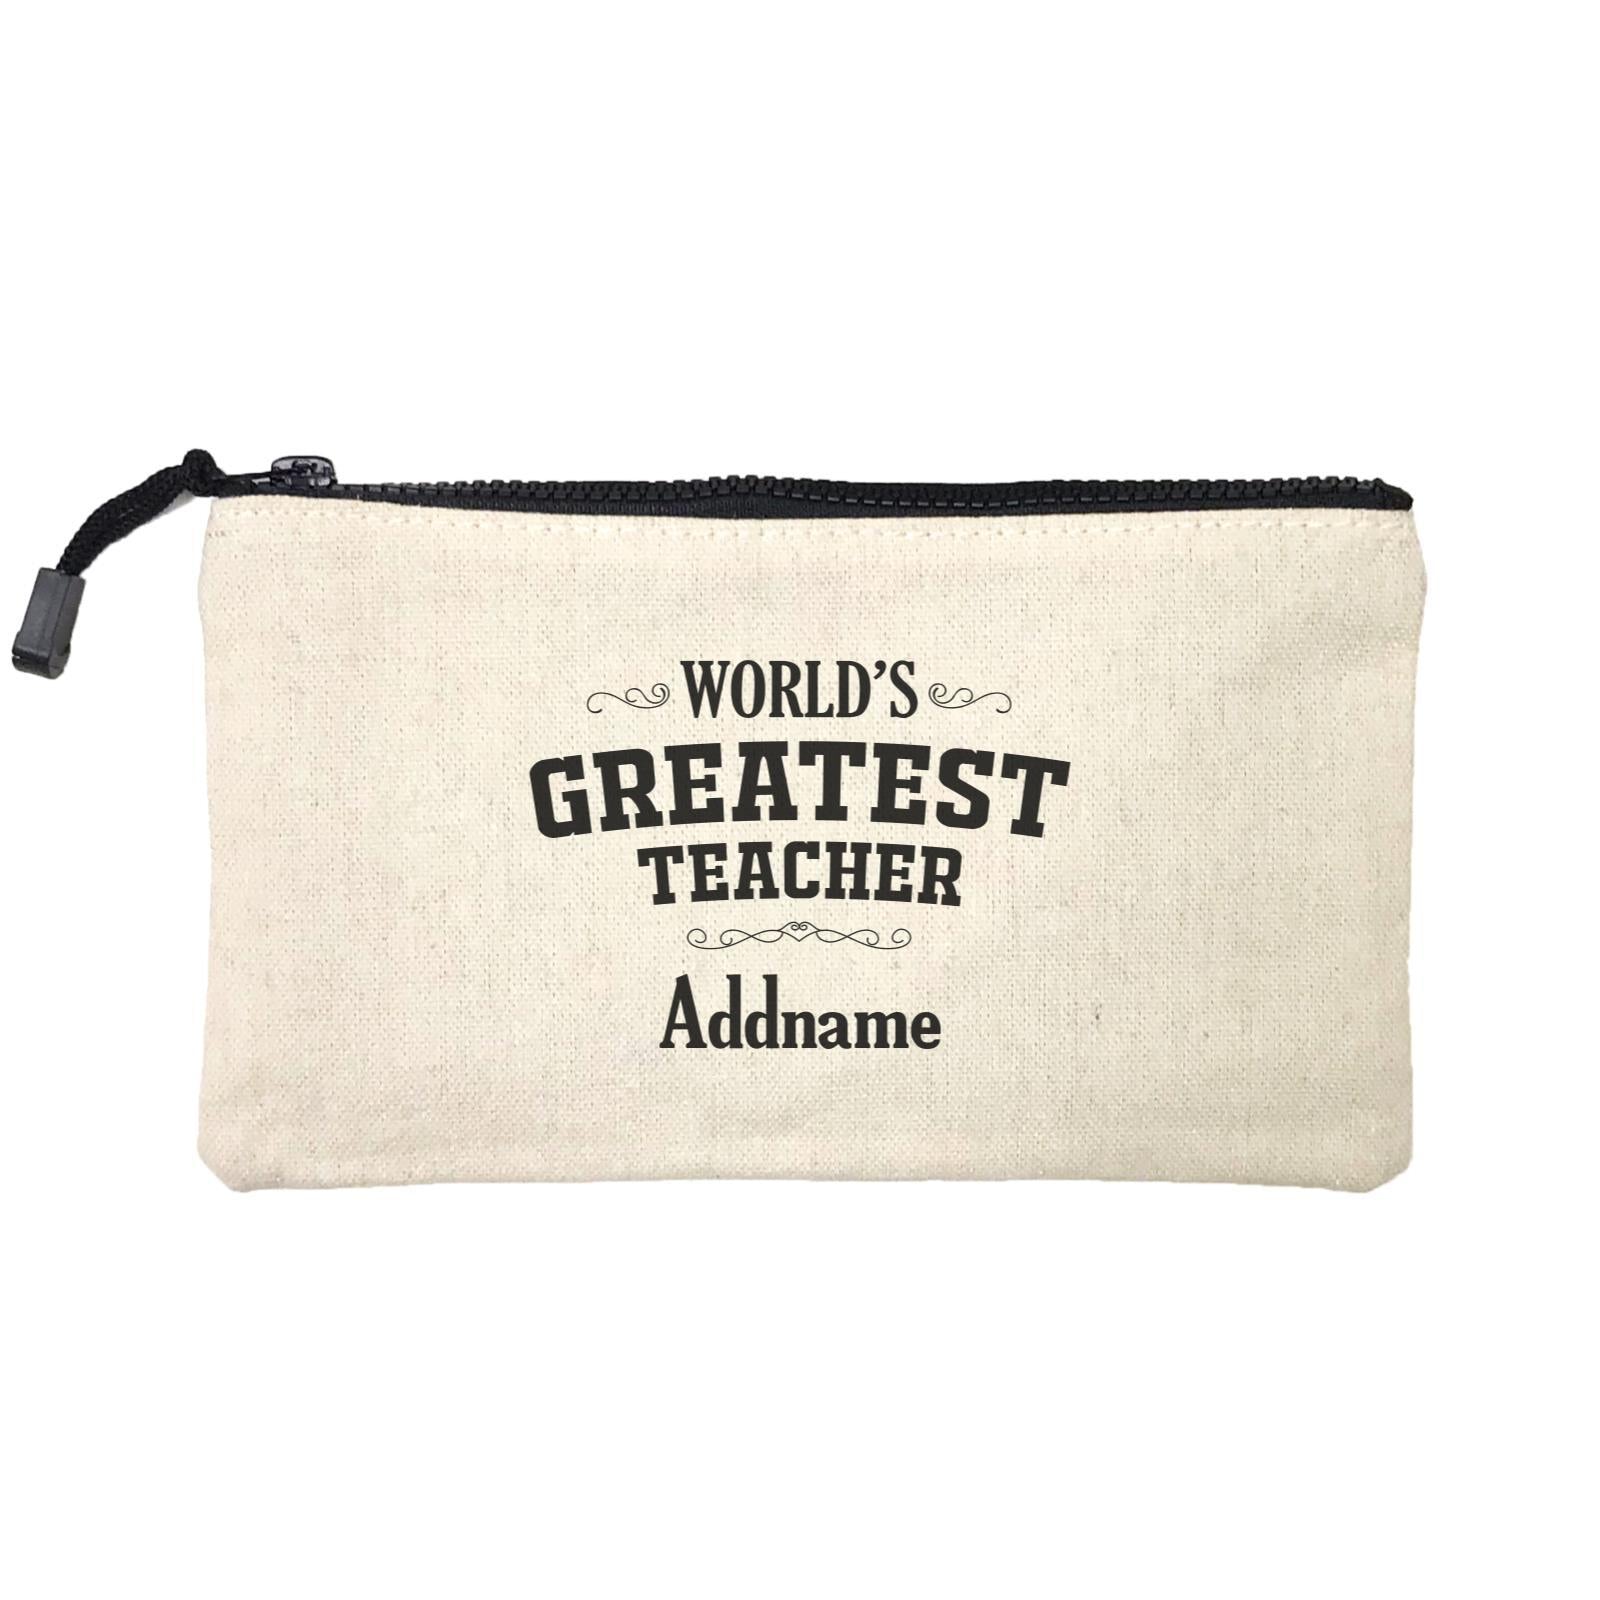 Great Teachers World's Greatest Teacher Addname Mini Accessories Stationery Pouch